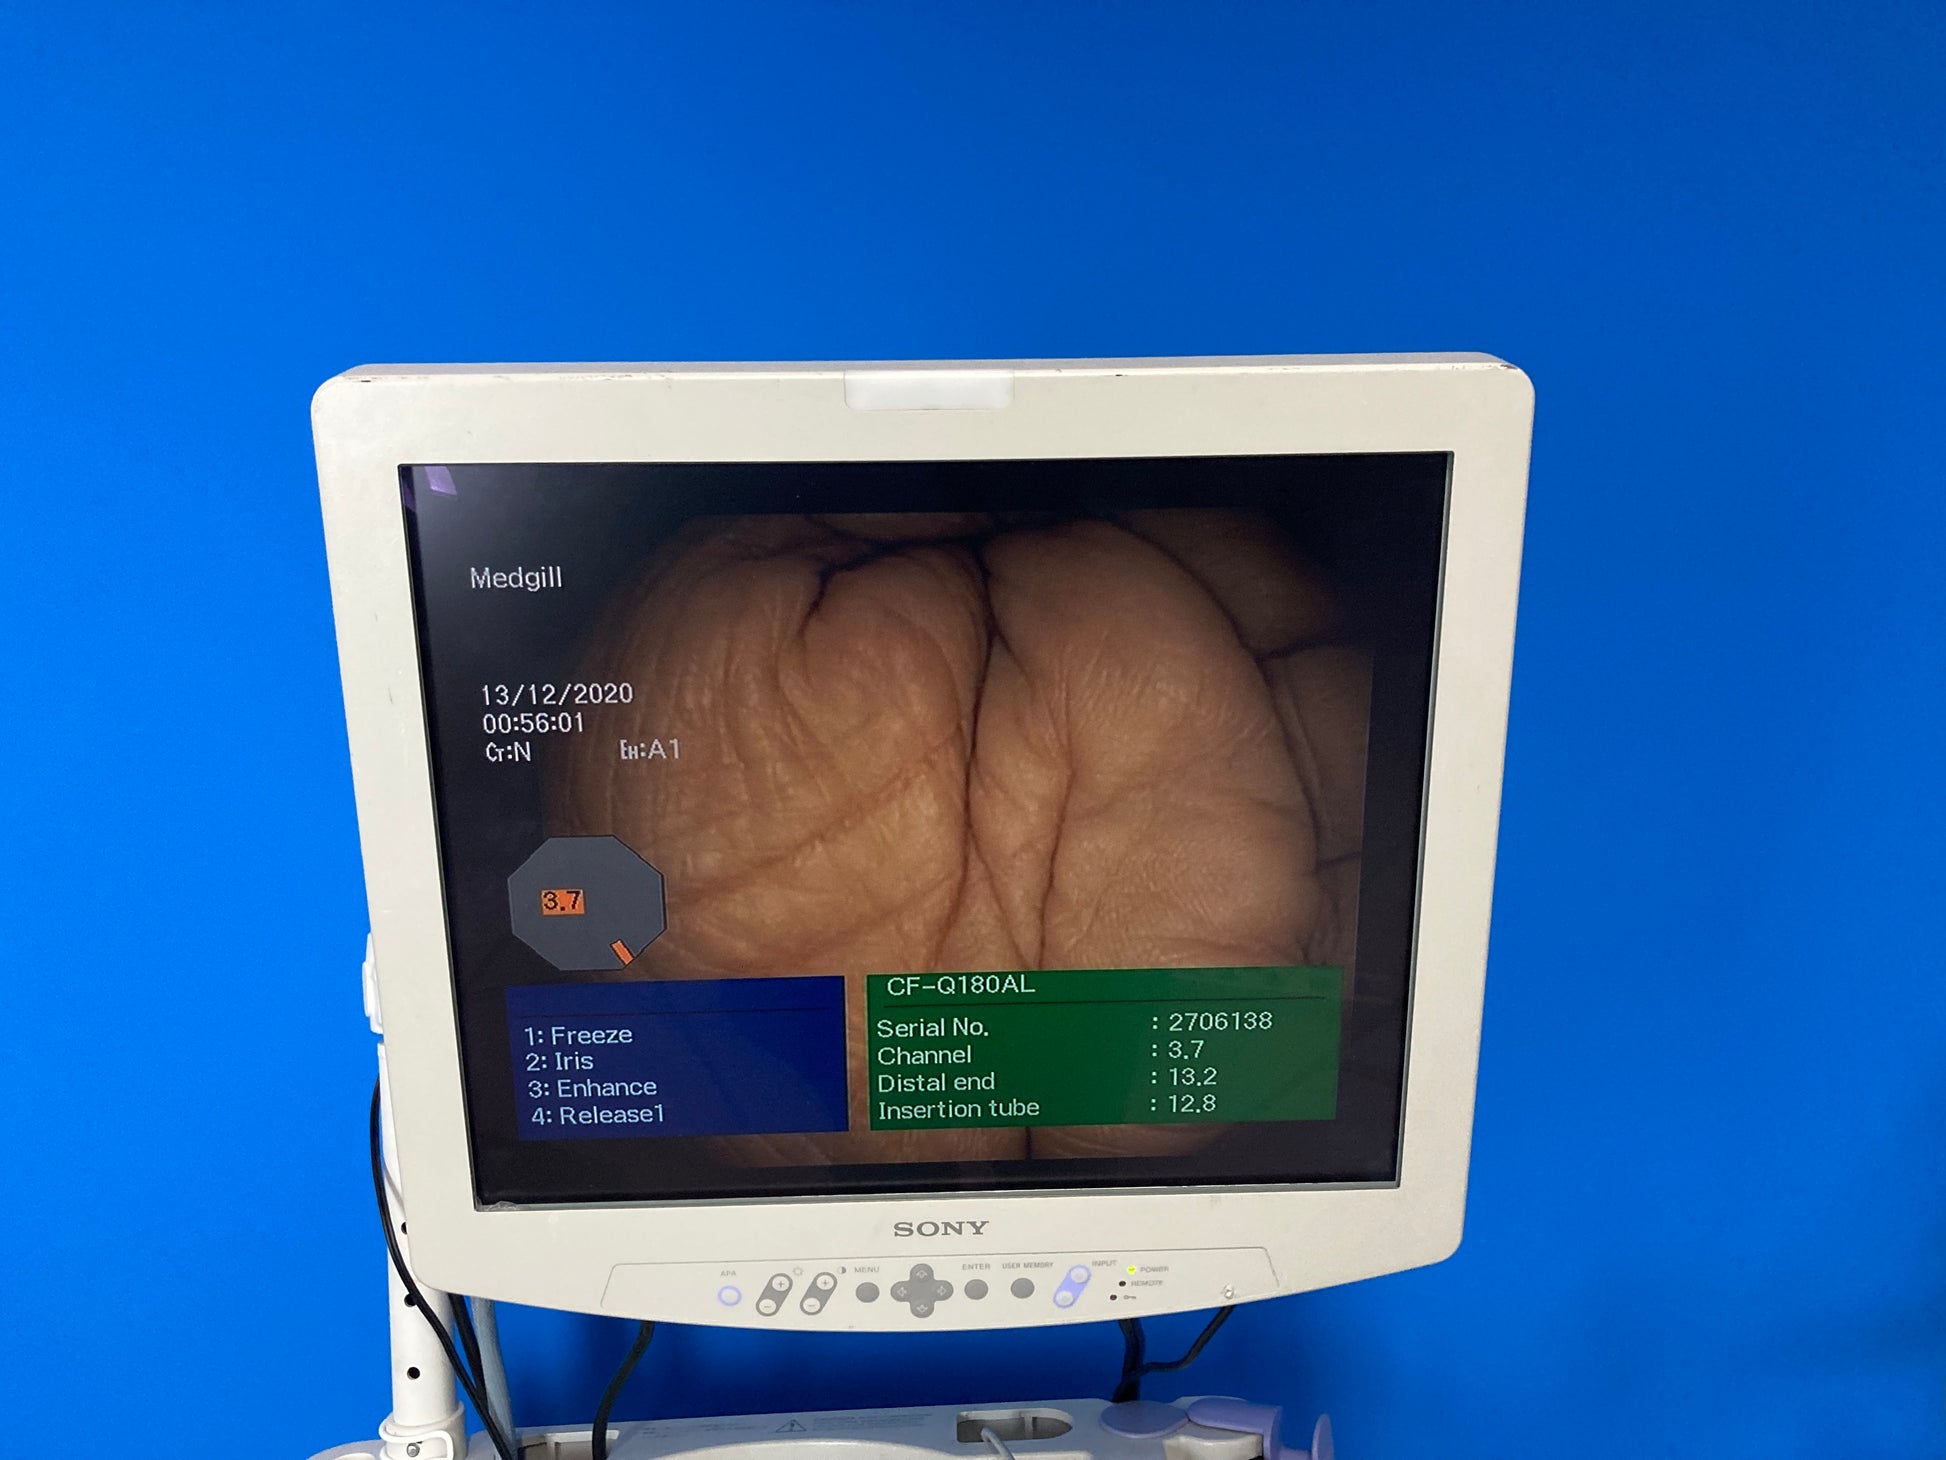 Sony LCD Monitor Widest field of view available in a colonoscope, 170 degrees Full screen display size give superior image quality